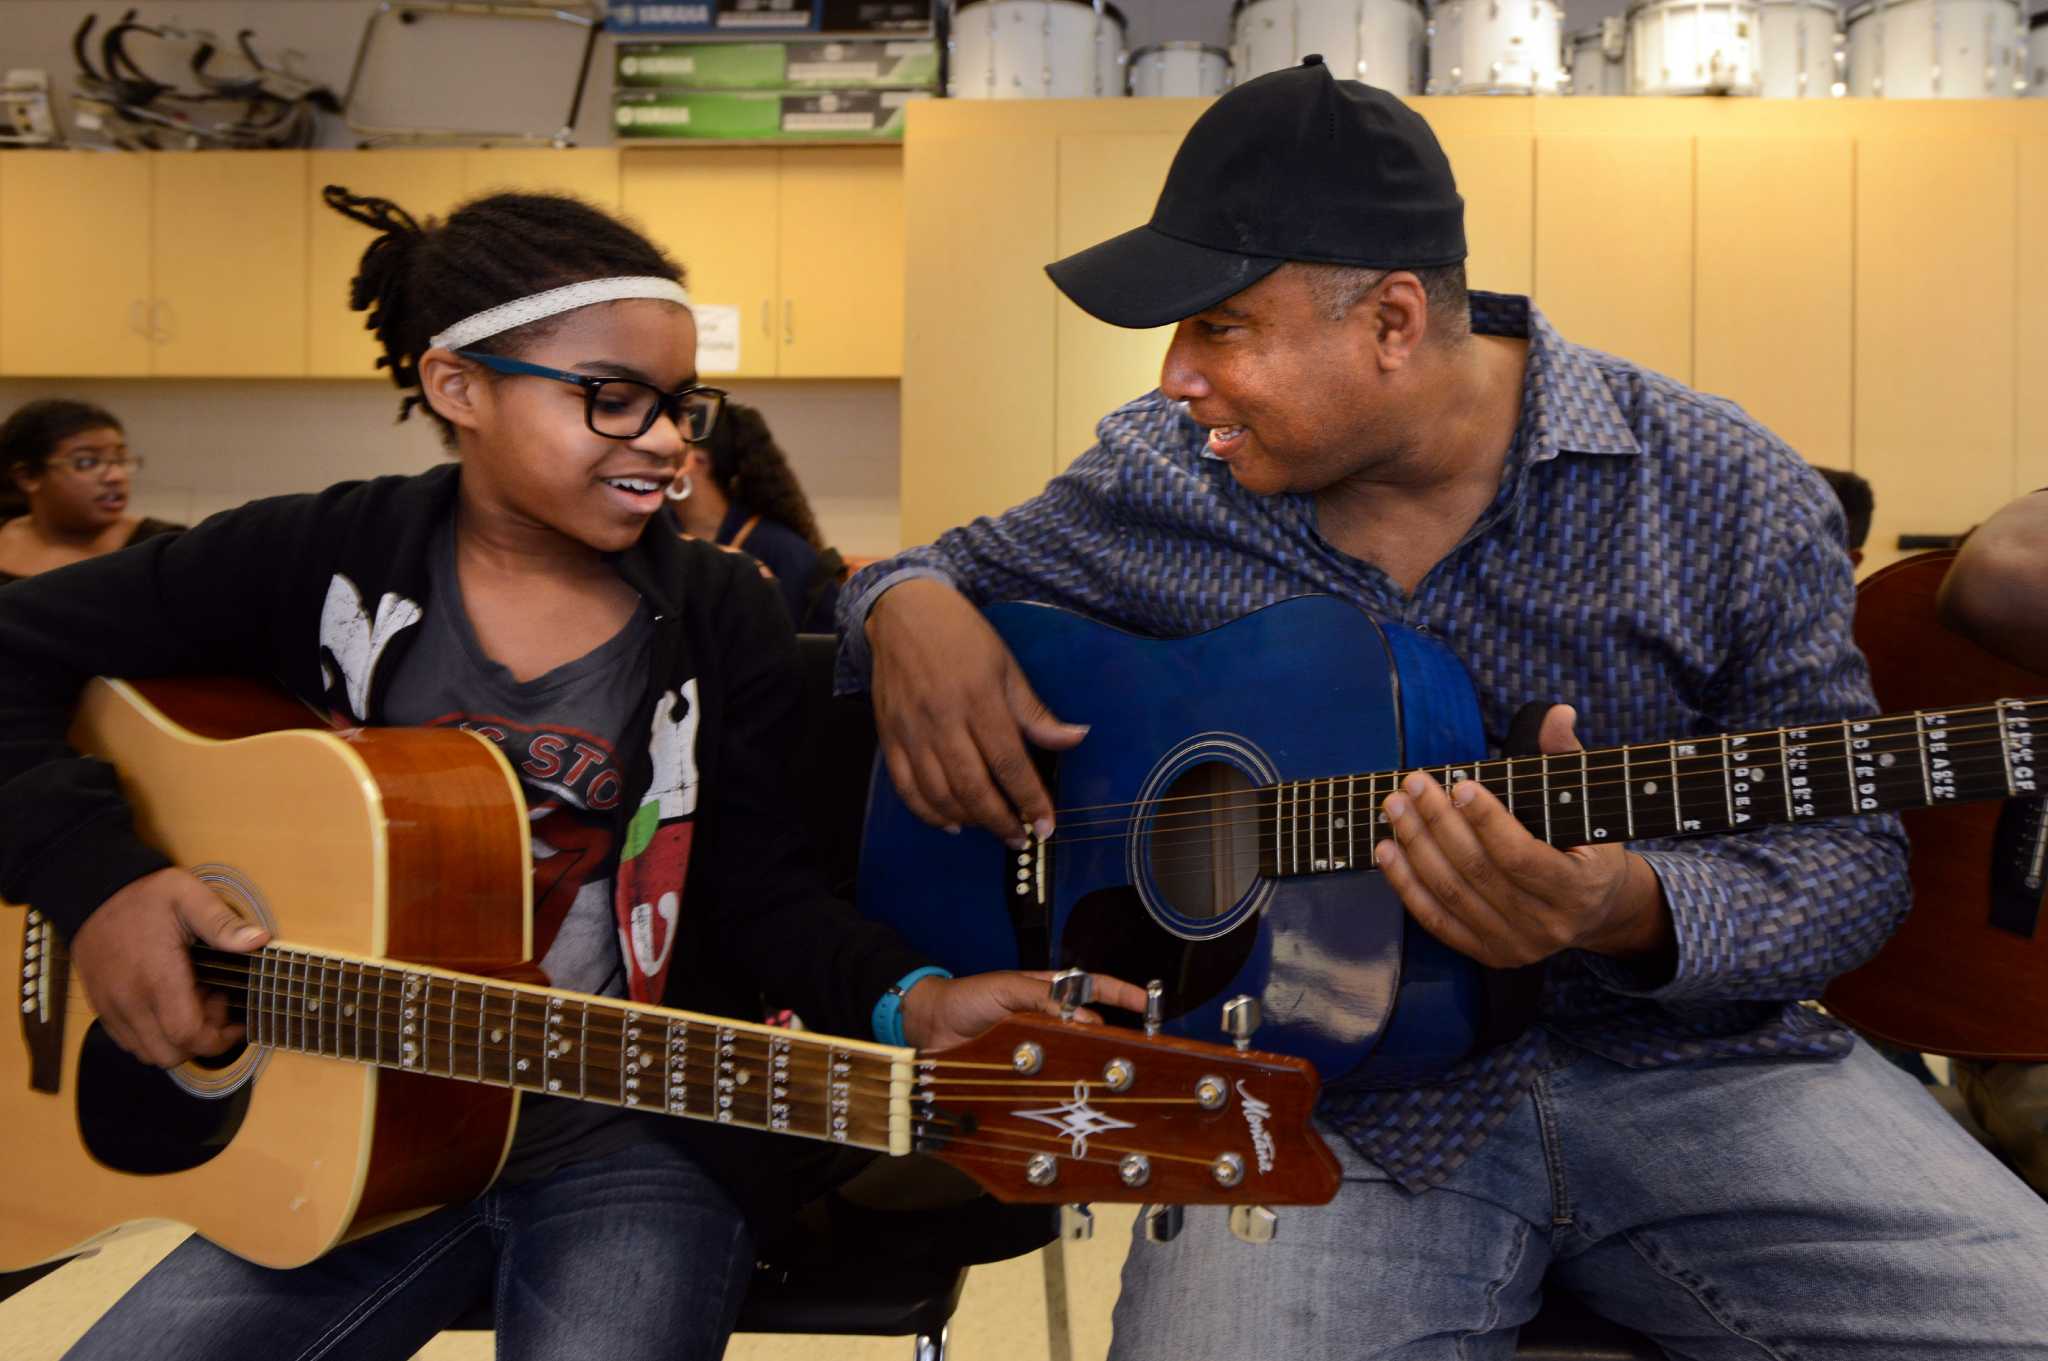 New Fairfield's Bernie Williams and guitar wows students